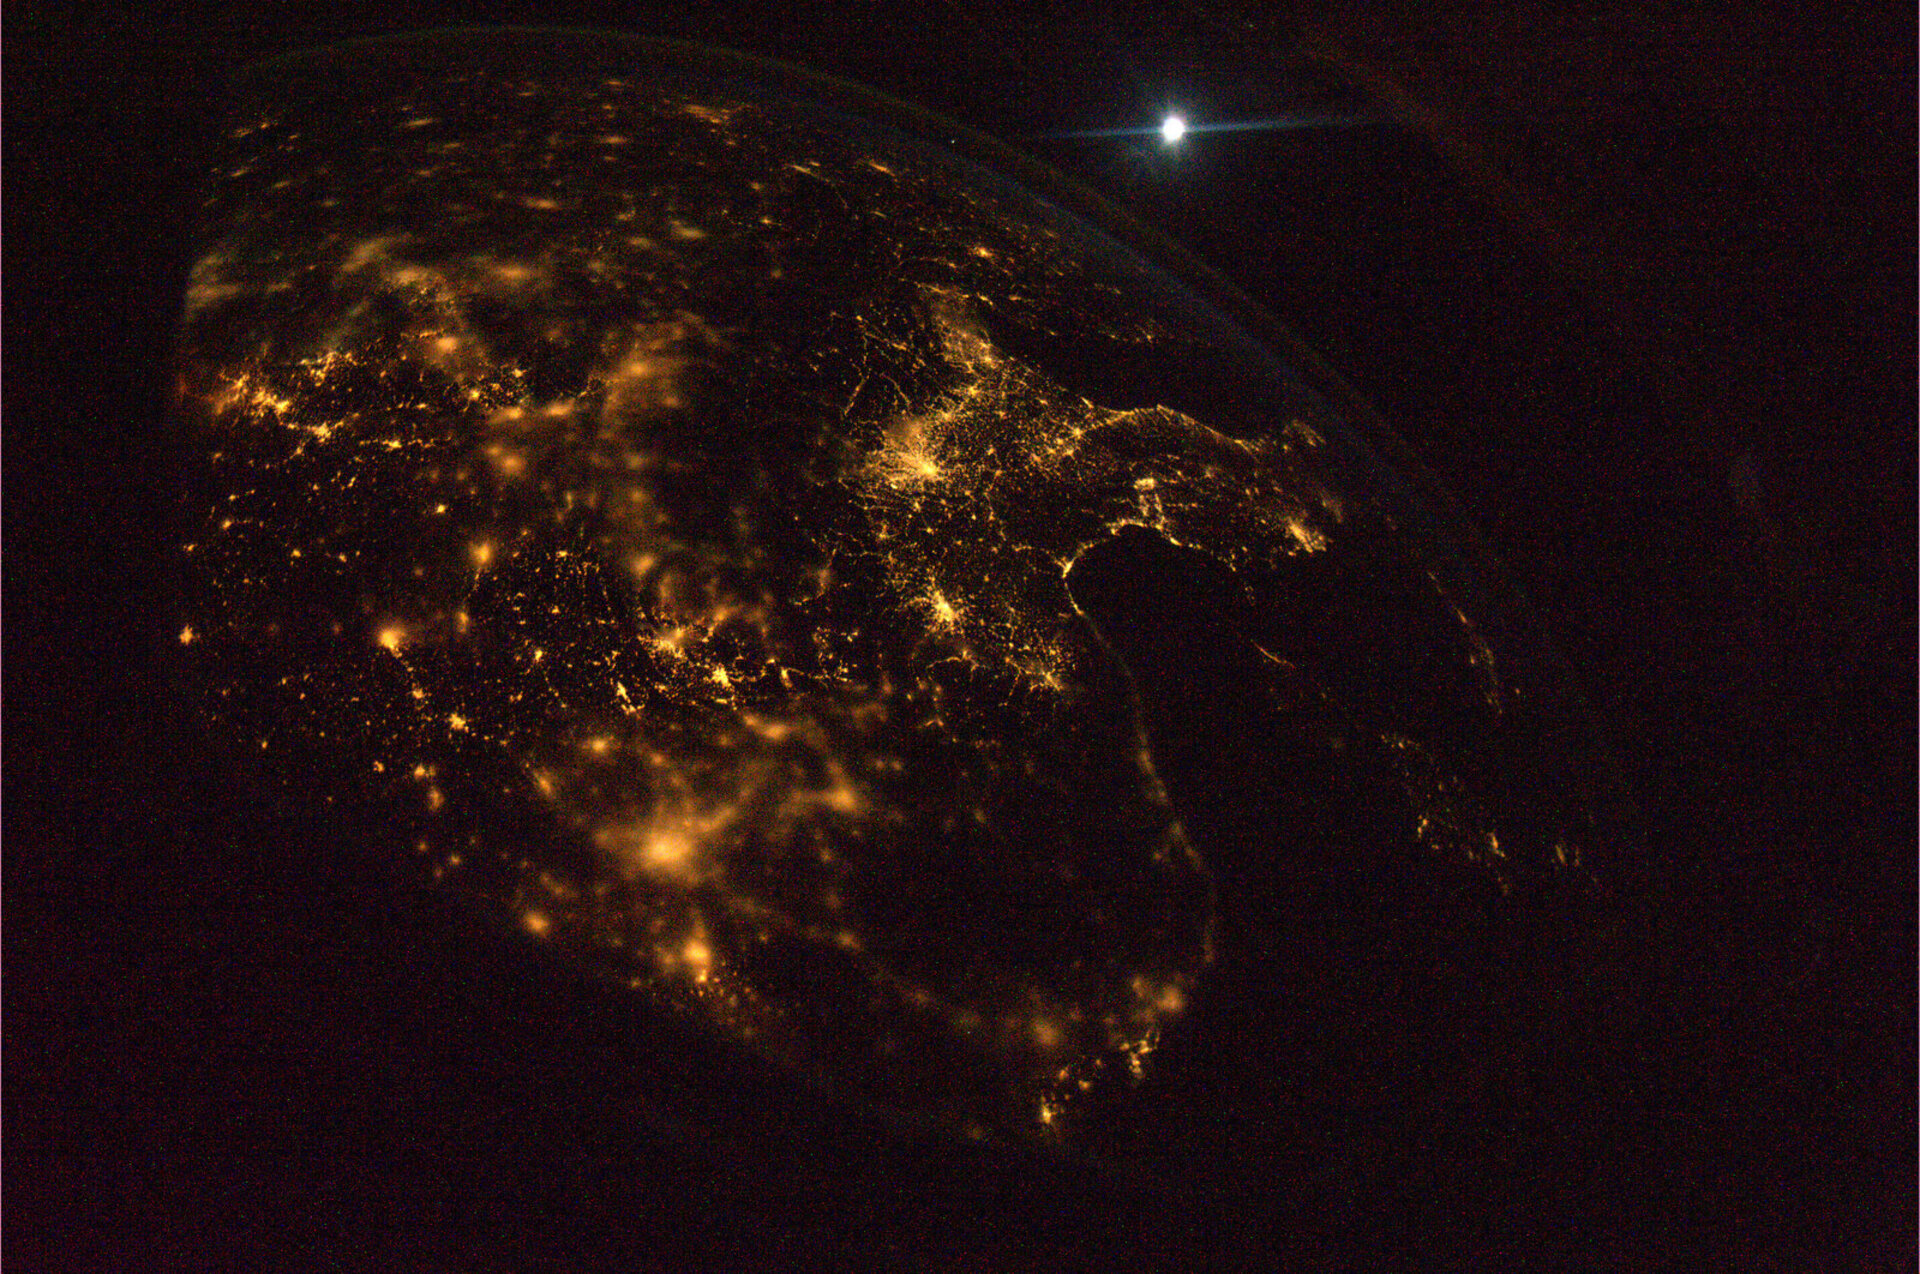 From over France, looking south, under the Moon